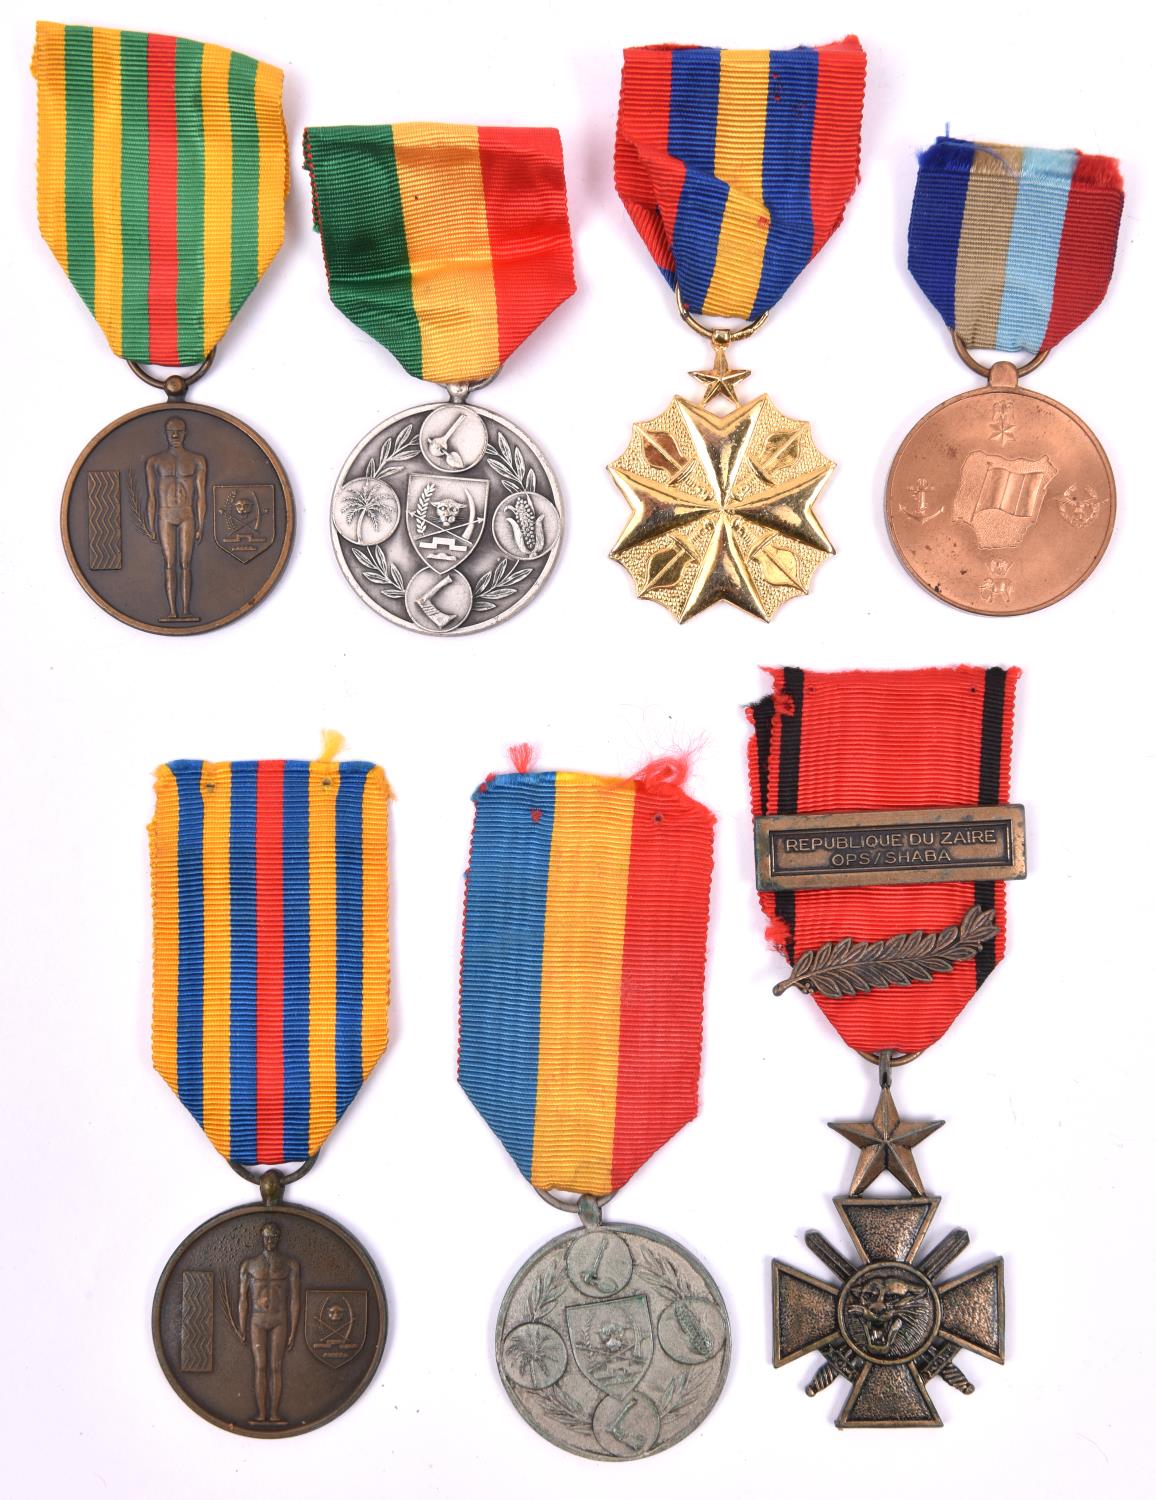 African nations medals (7): Congo Republic medal for sporting merit, ditto agricultural merit,